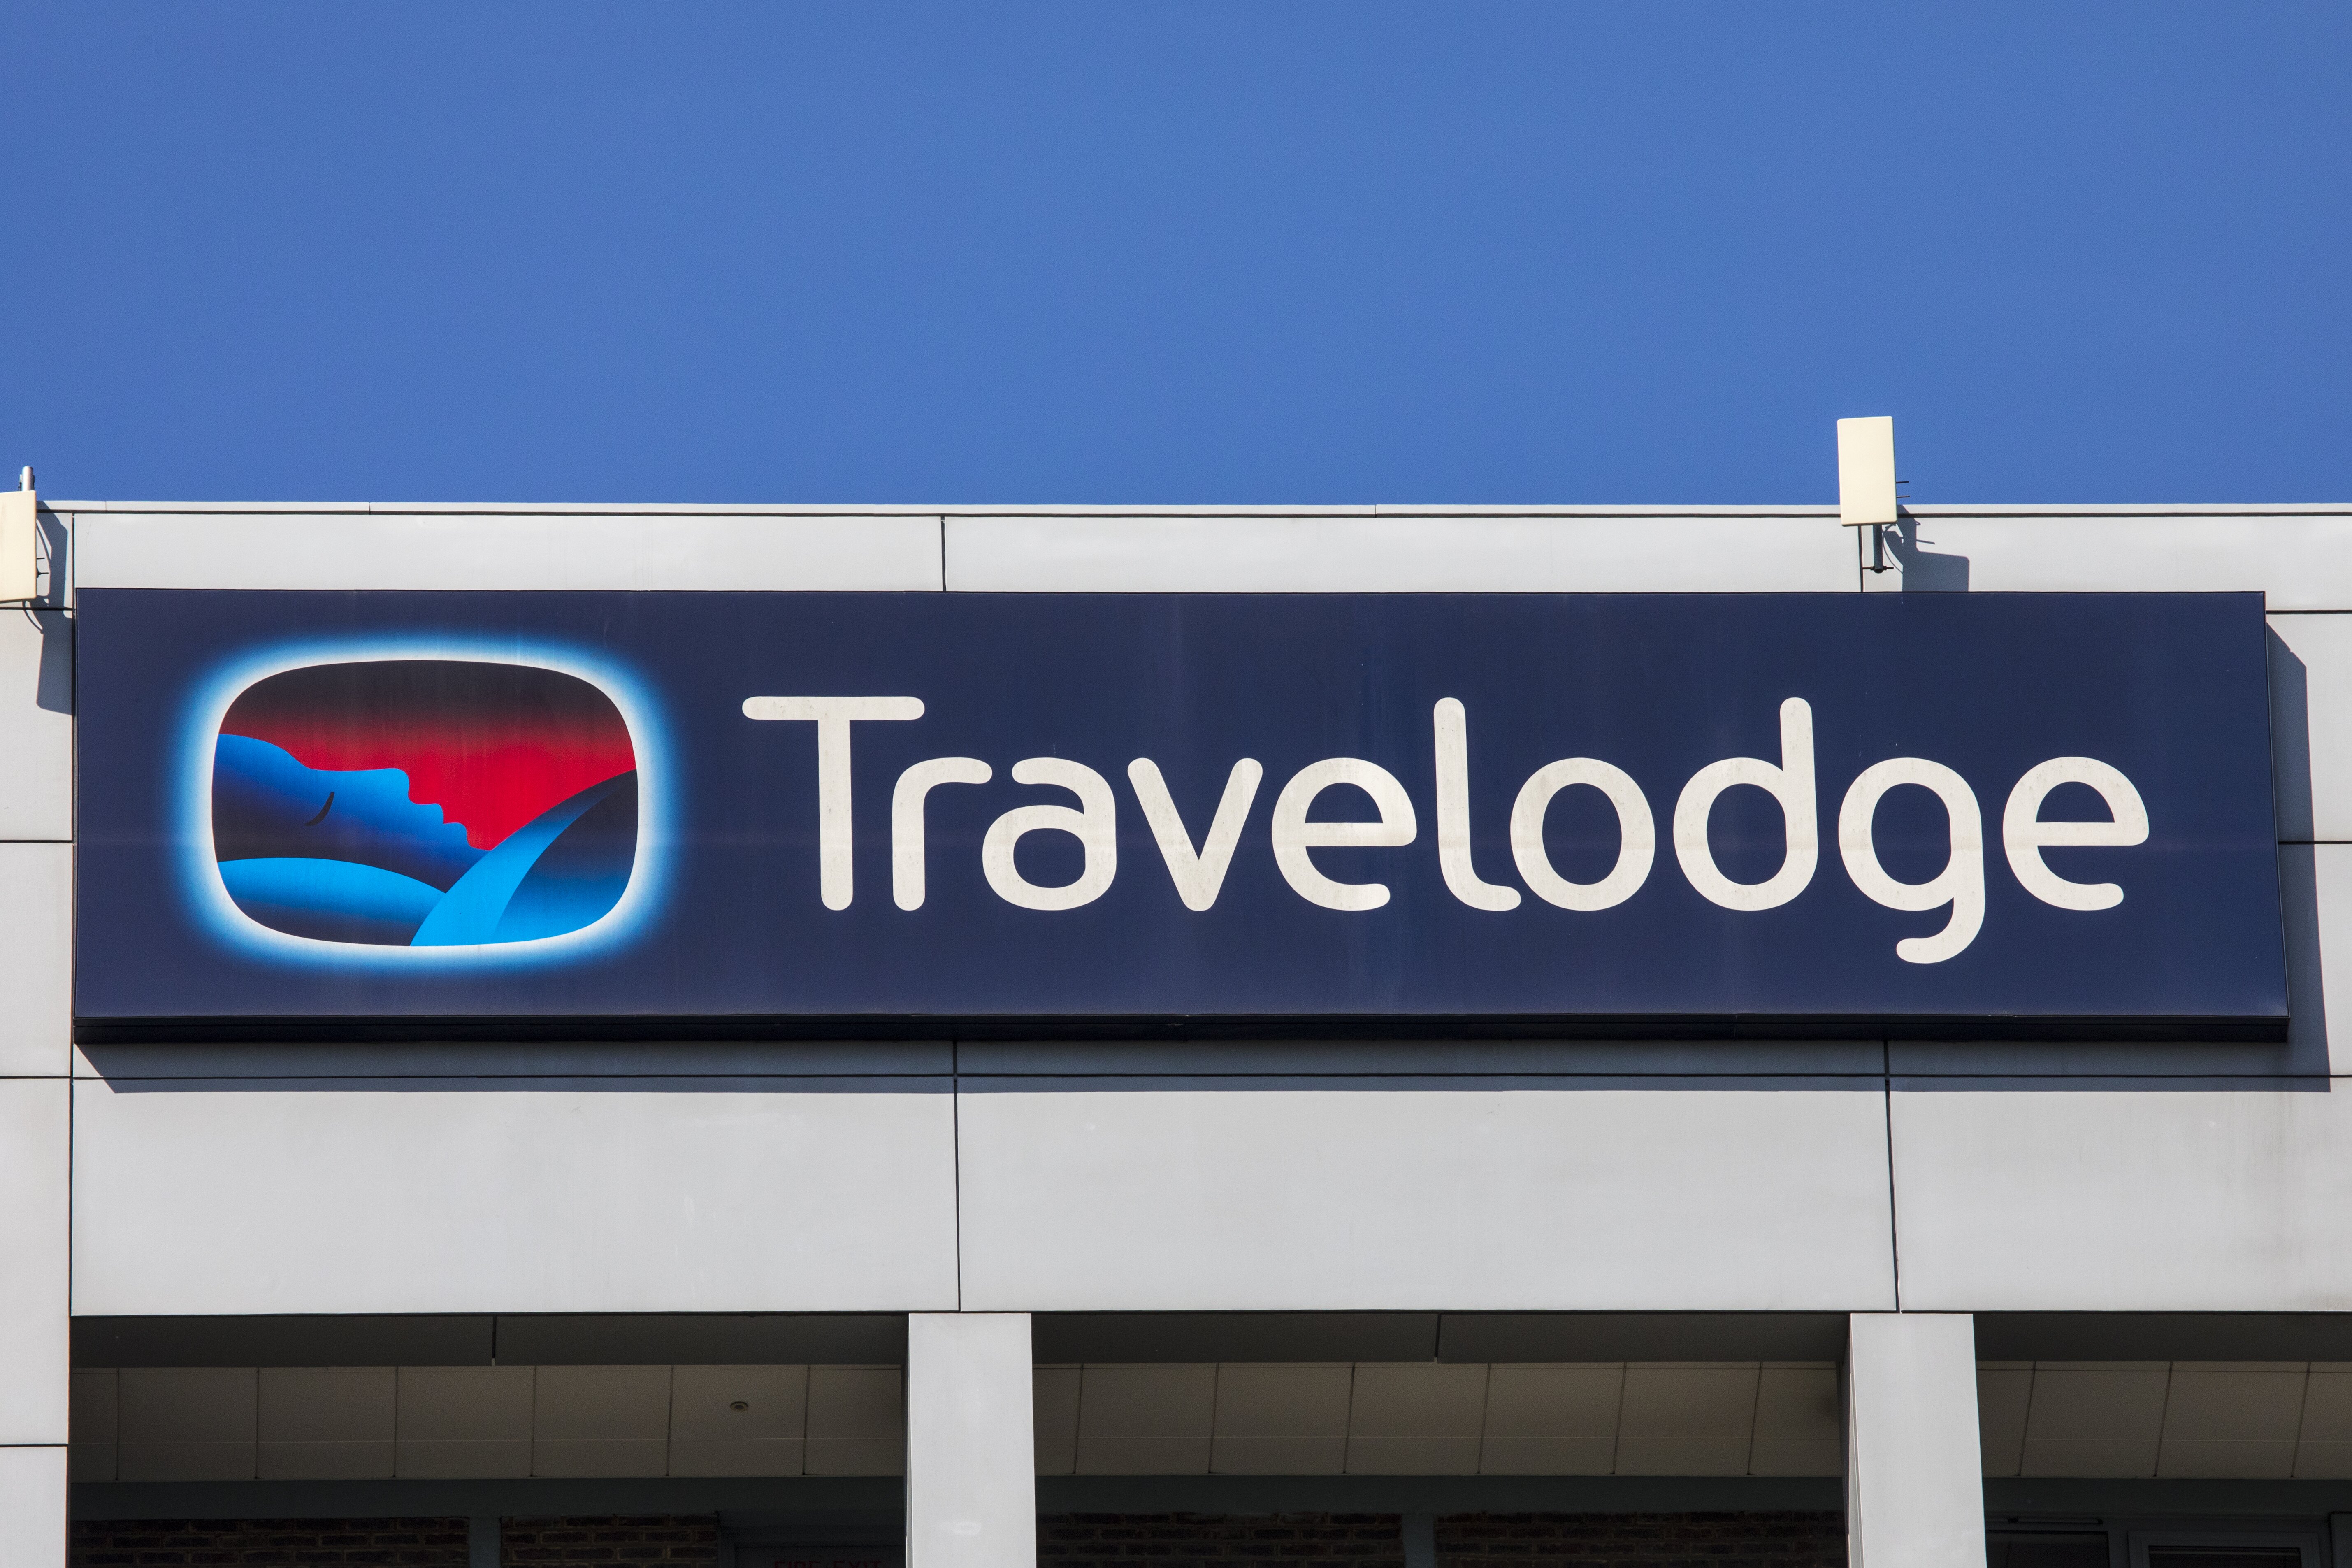 Travelodge revenue exceeds £1b for the first time